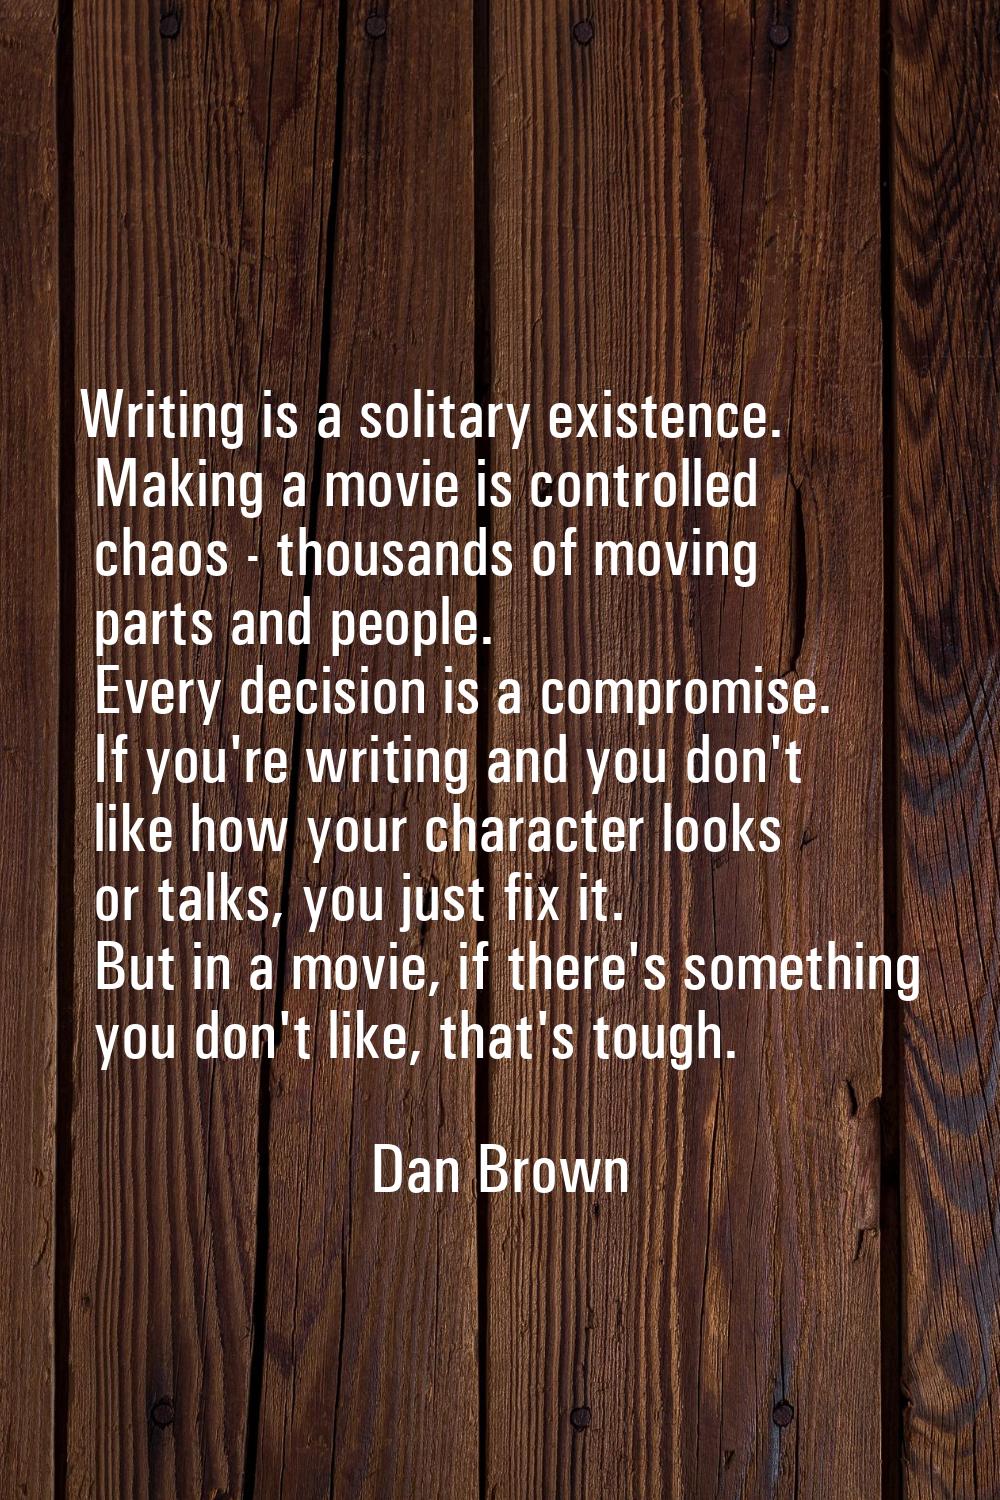 Writing is a solitary existence. Making a movie is controlled chaos - thousands of moving parts and